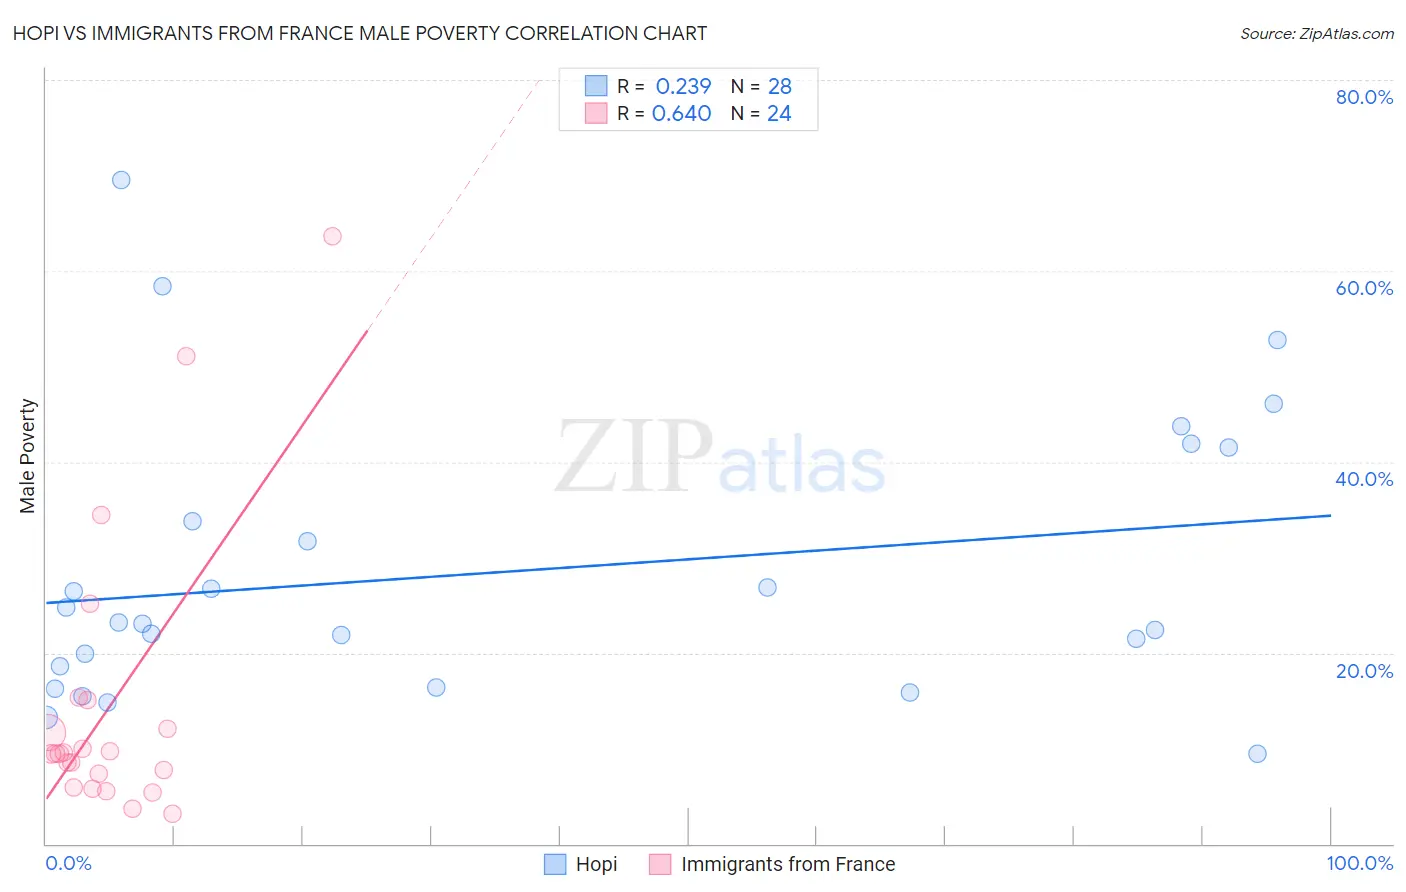 Hopi vs Immigrants from France Male Poverty